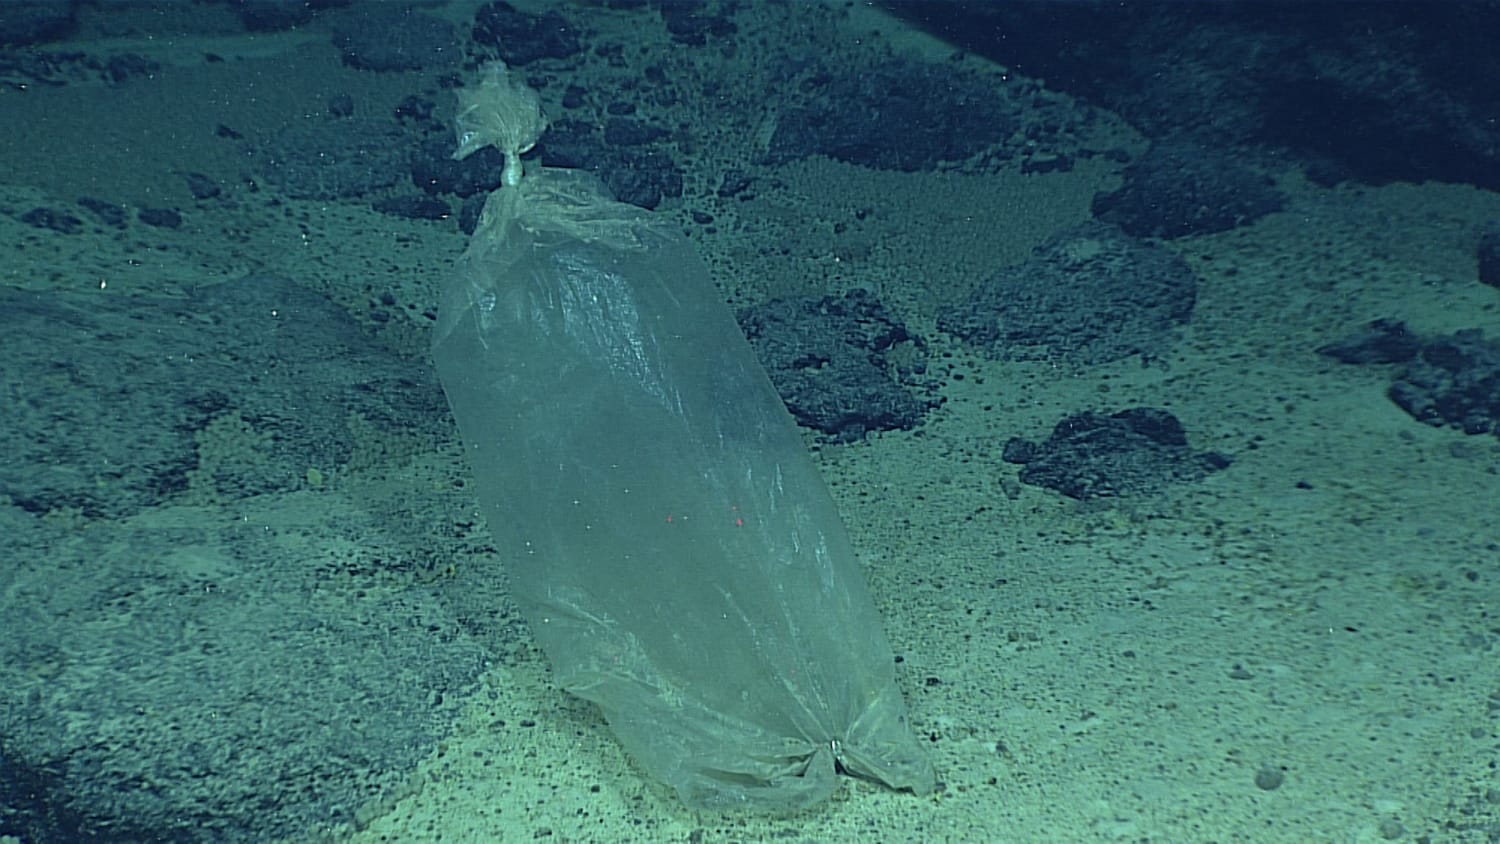 Plastic bag found near the bottom of the Marianas Trench